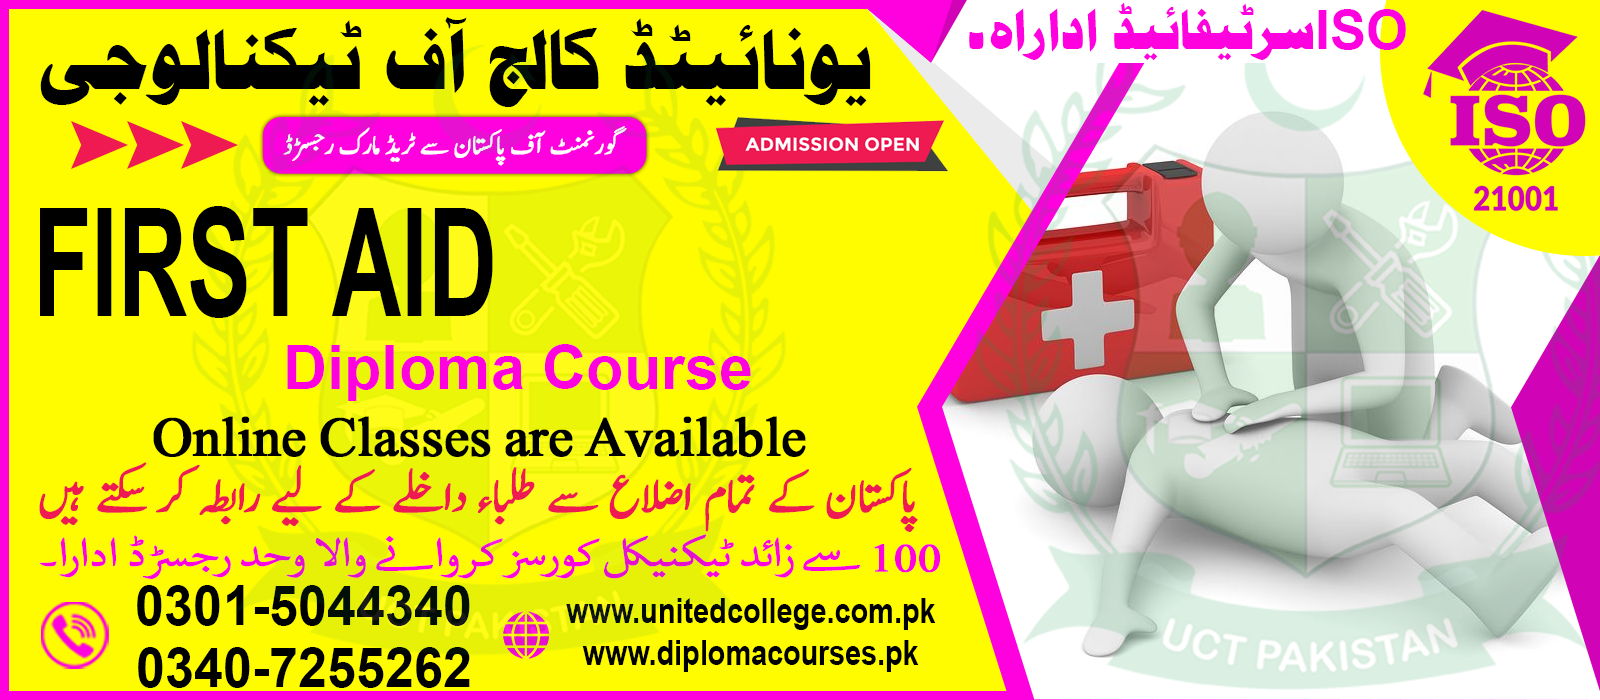 FIRST AID COURSE